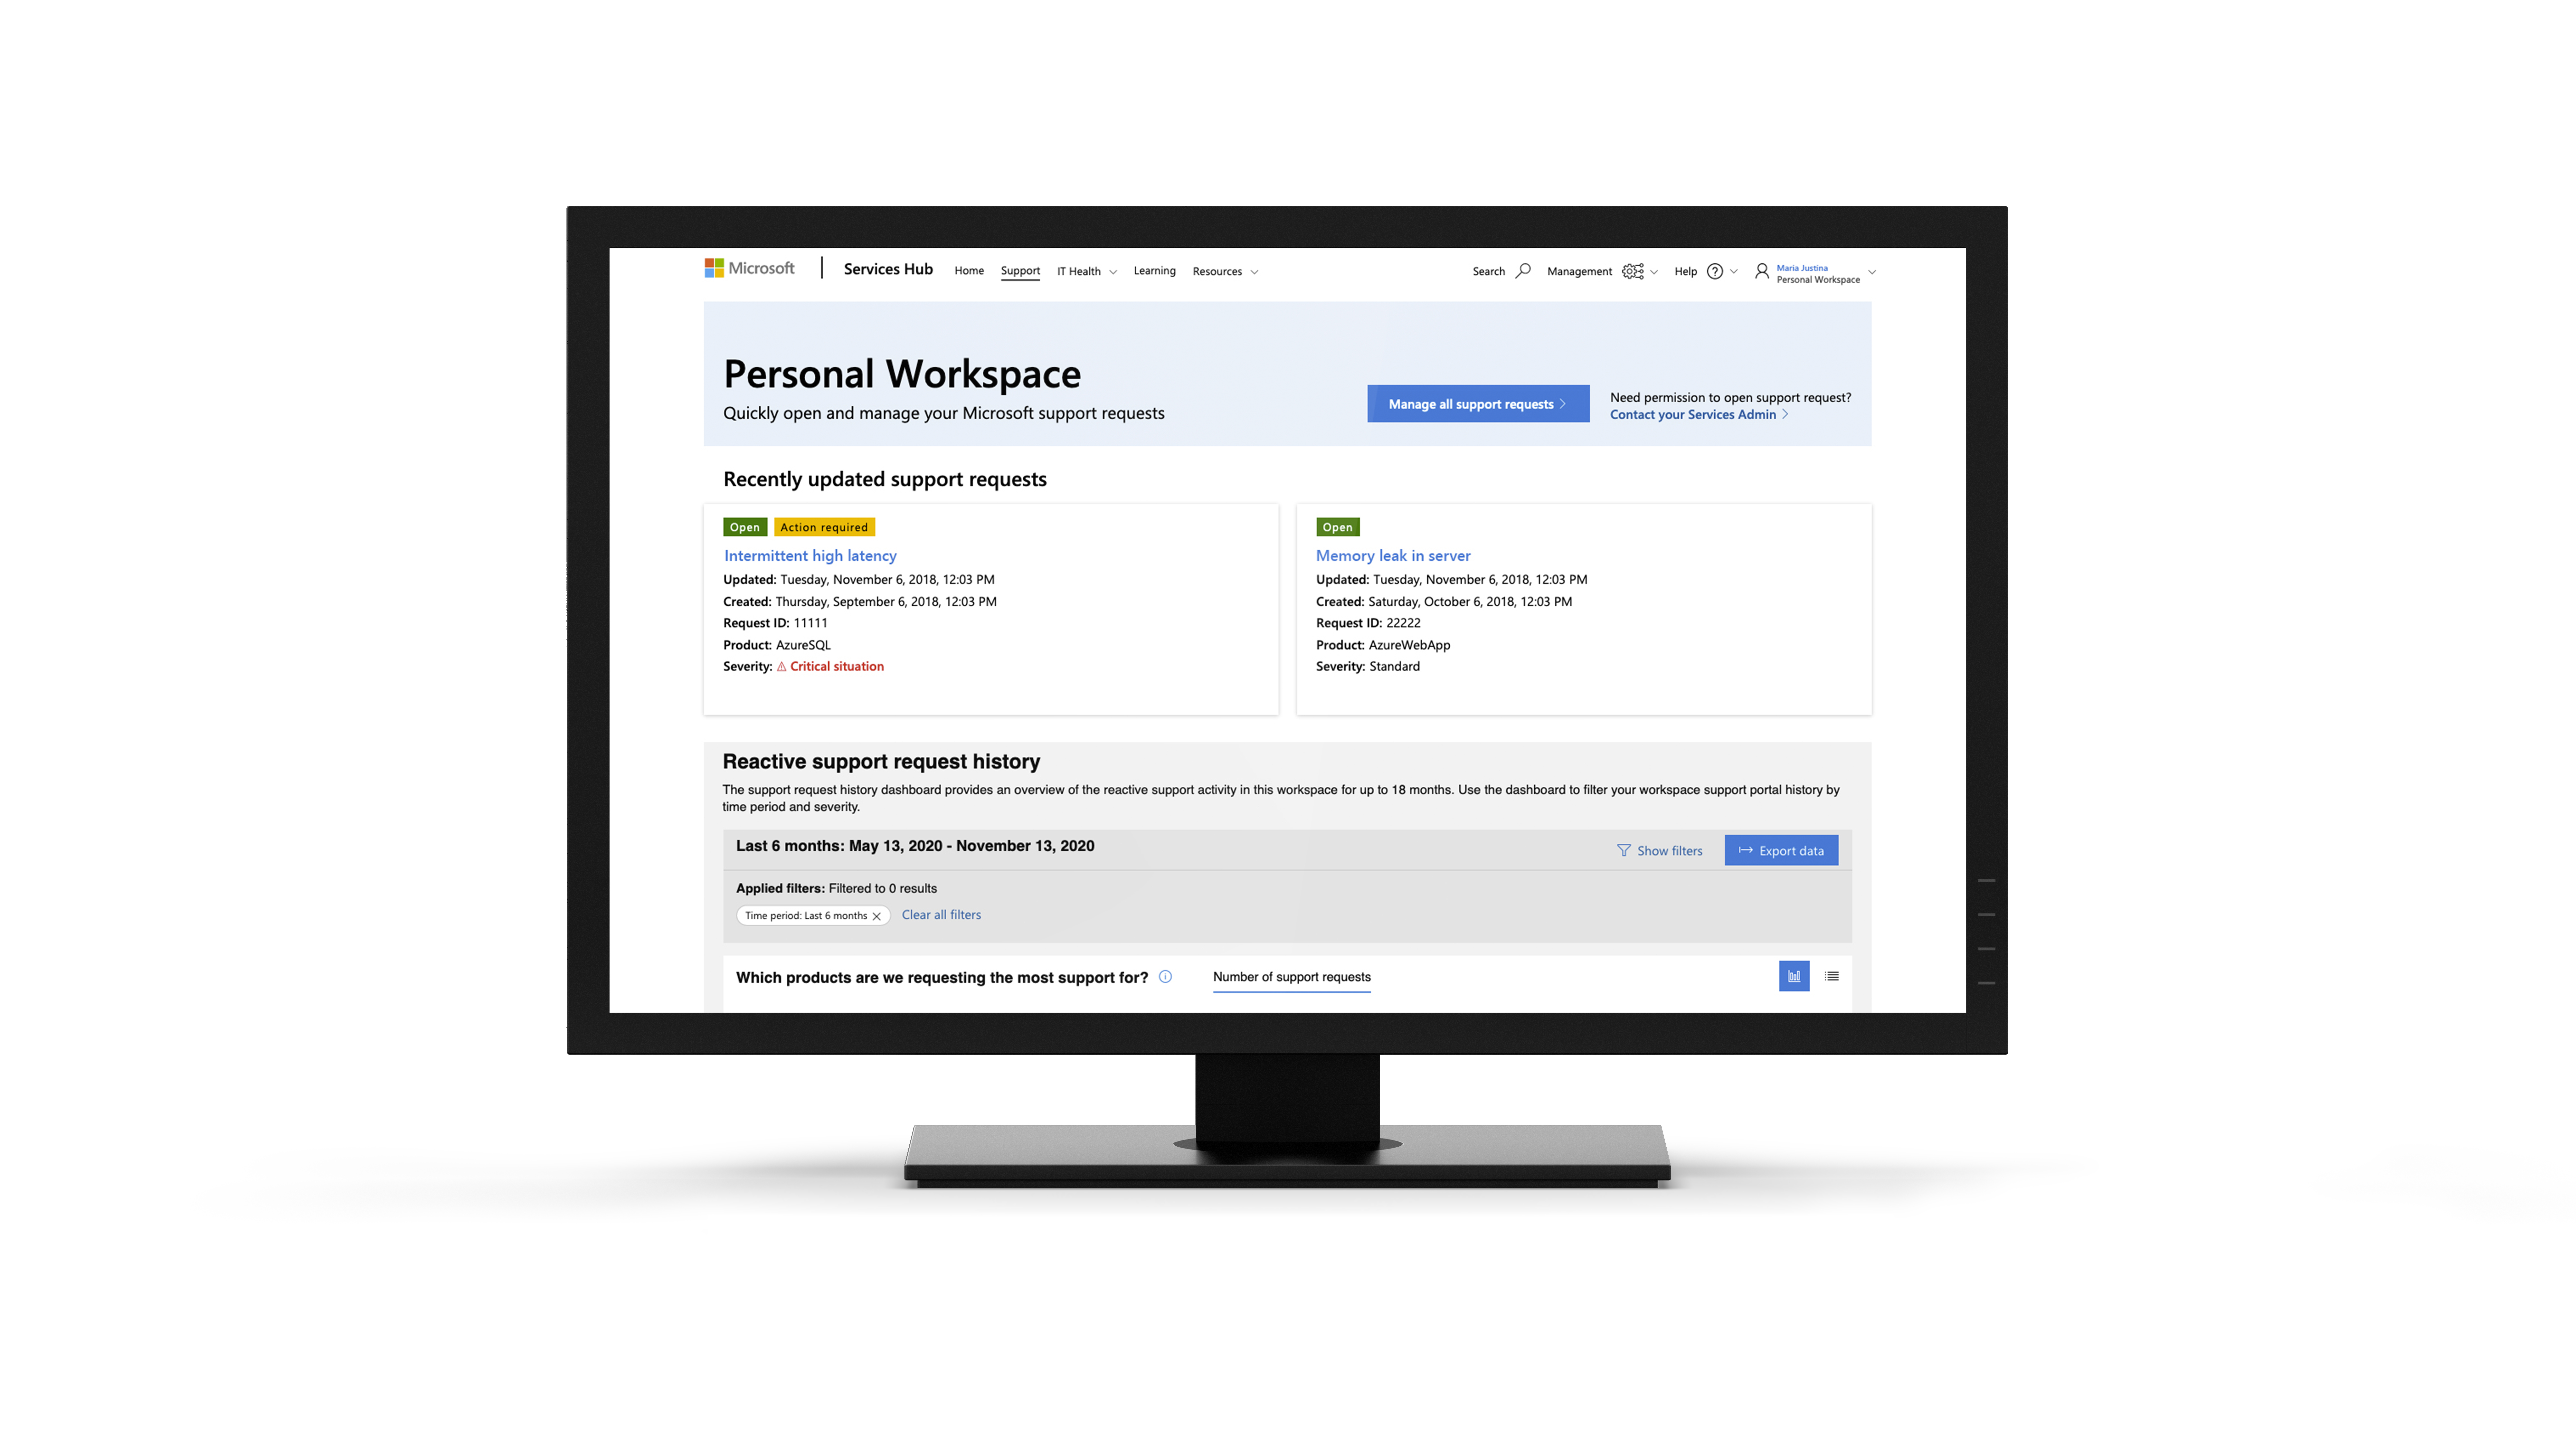 Monitor displaying the Personal Workspace screen in Microsoft Services Hub.